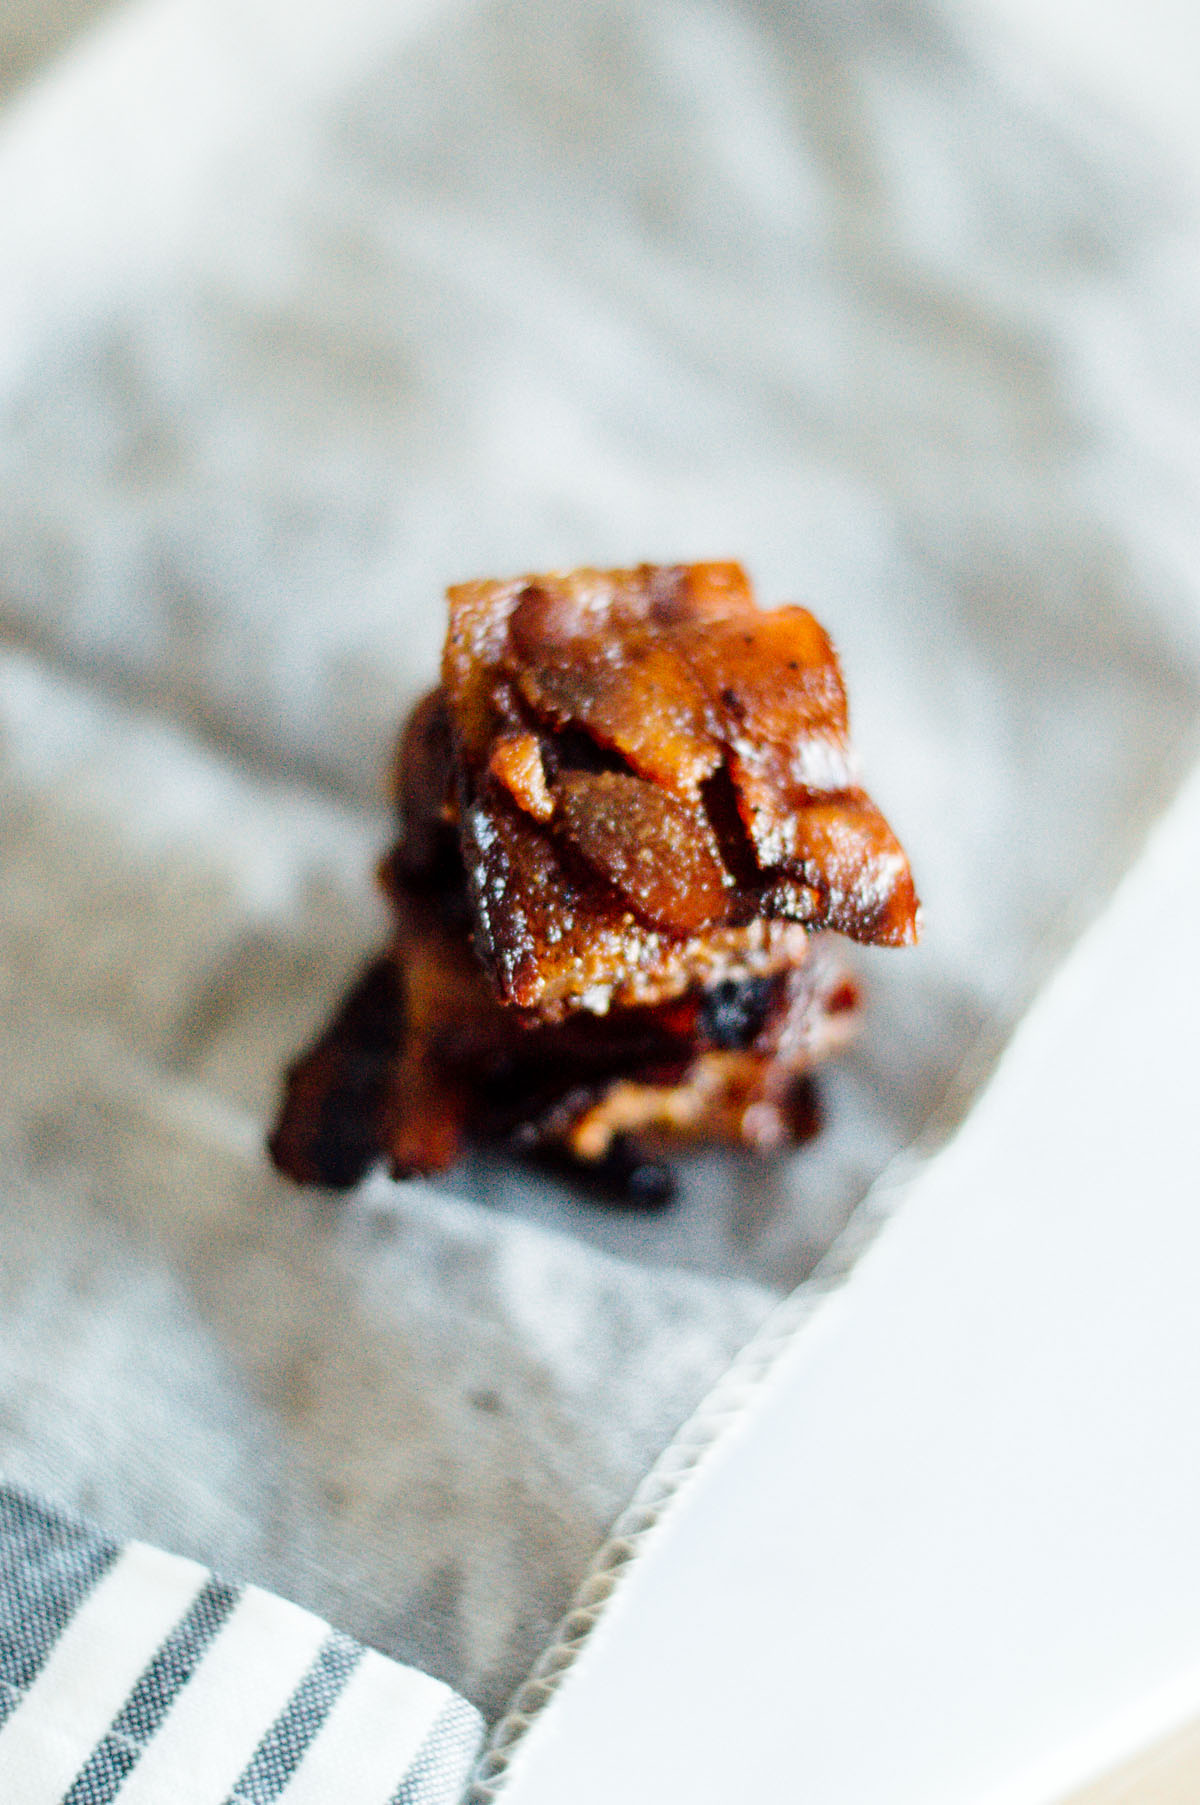 Candied bacon, yes please! Here's a fall cocktail recipe to use your bacon in - the Maple Bourbon Apple Cider | bygabriella.co